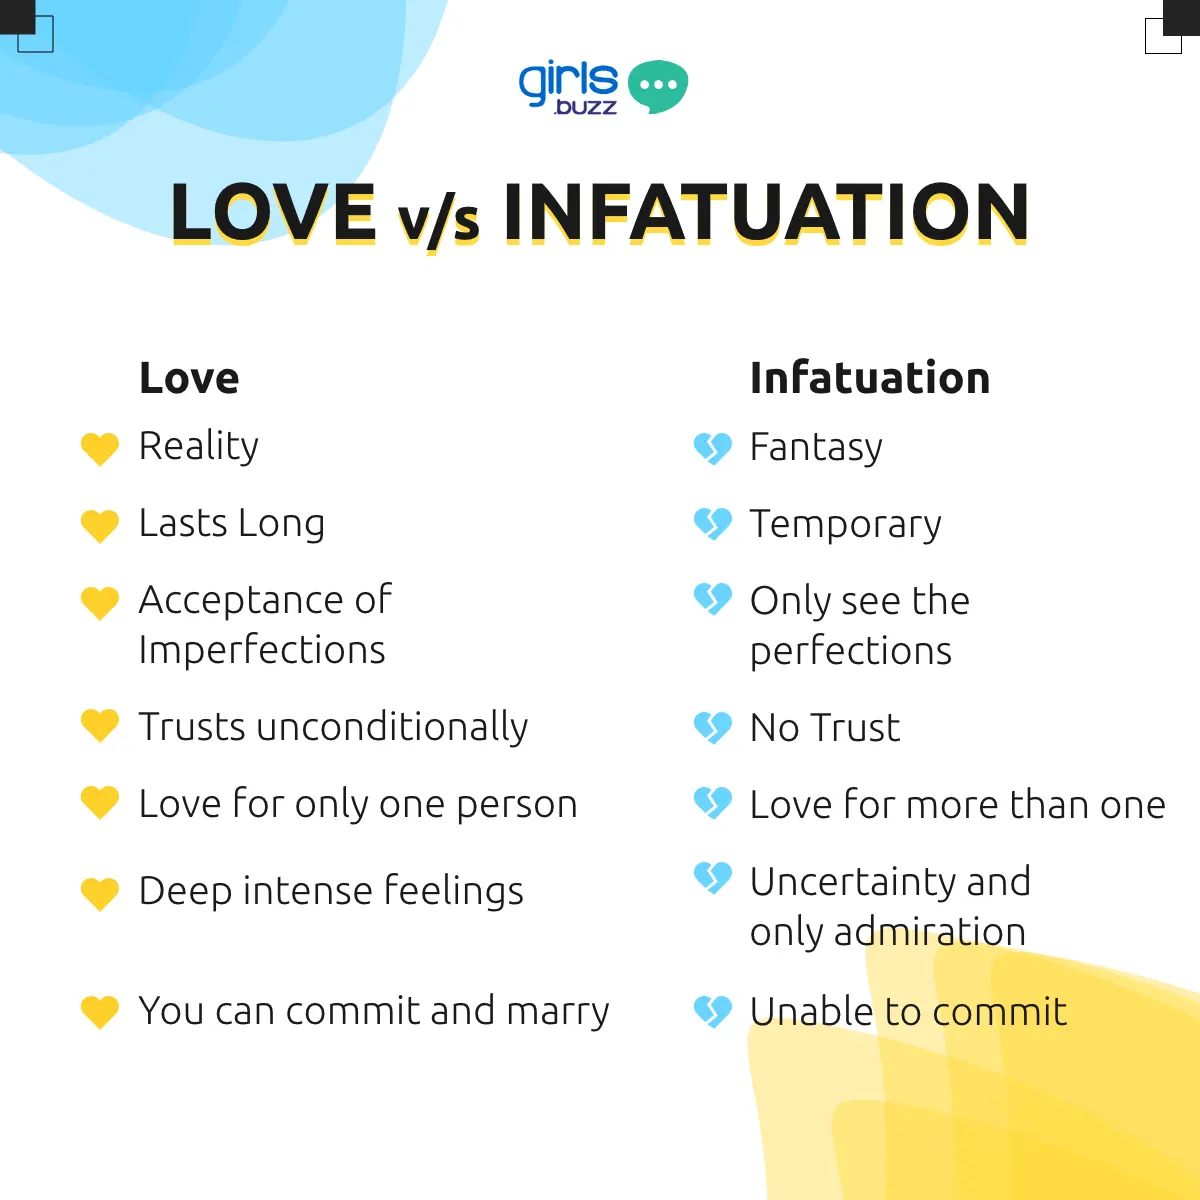 10. Love vs Infatuation: What goes a long way? 